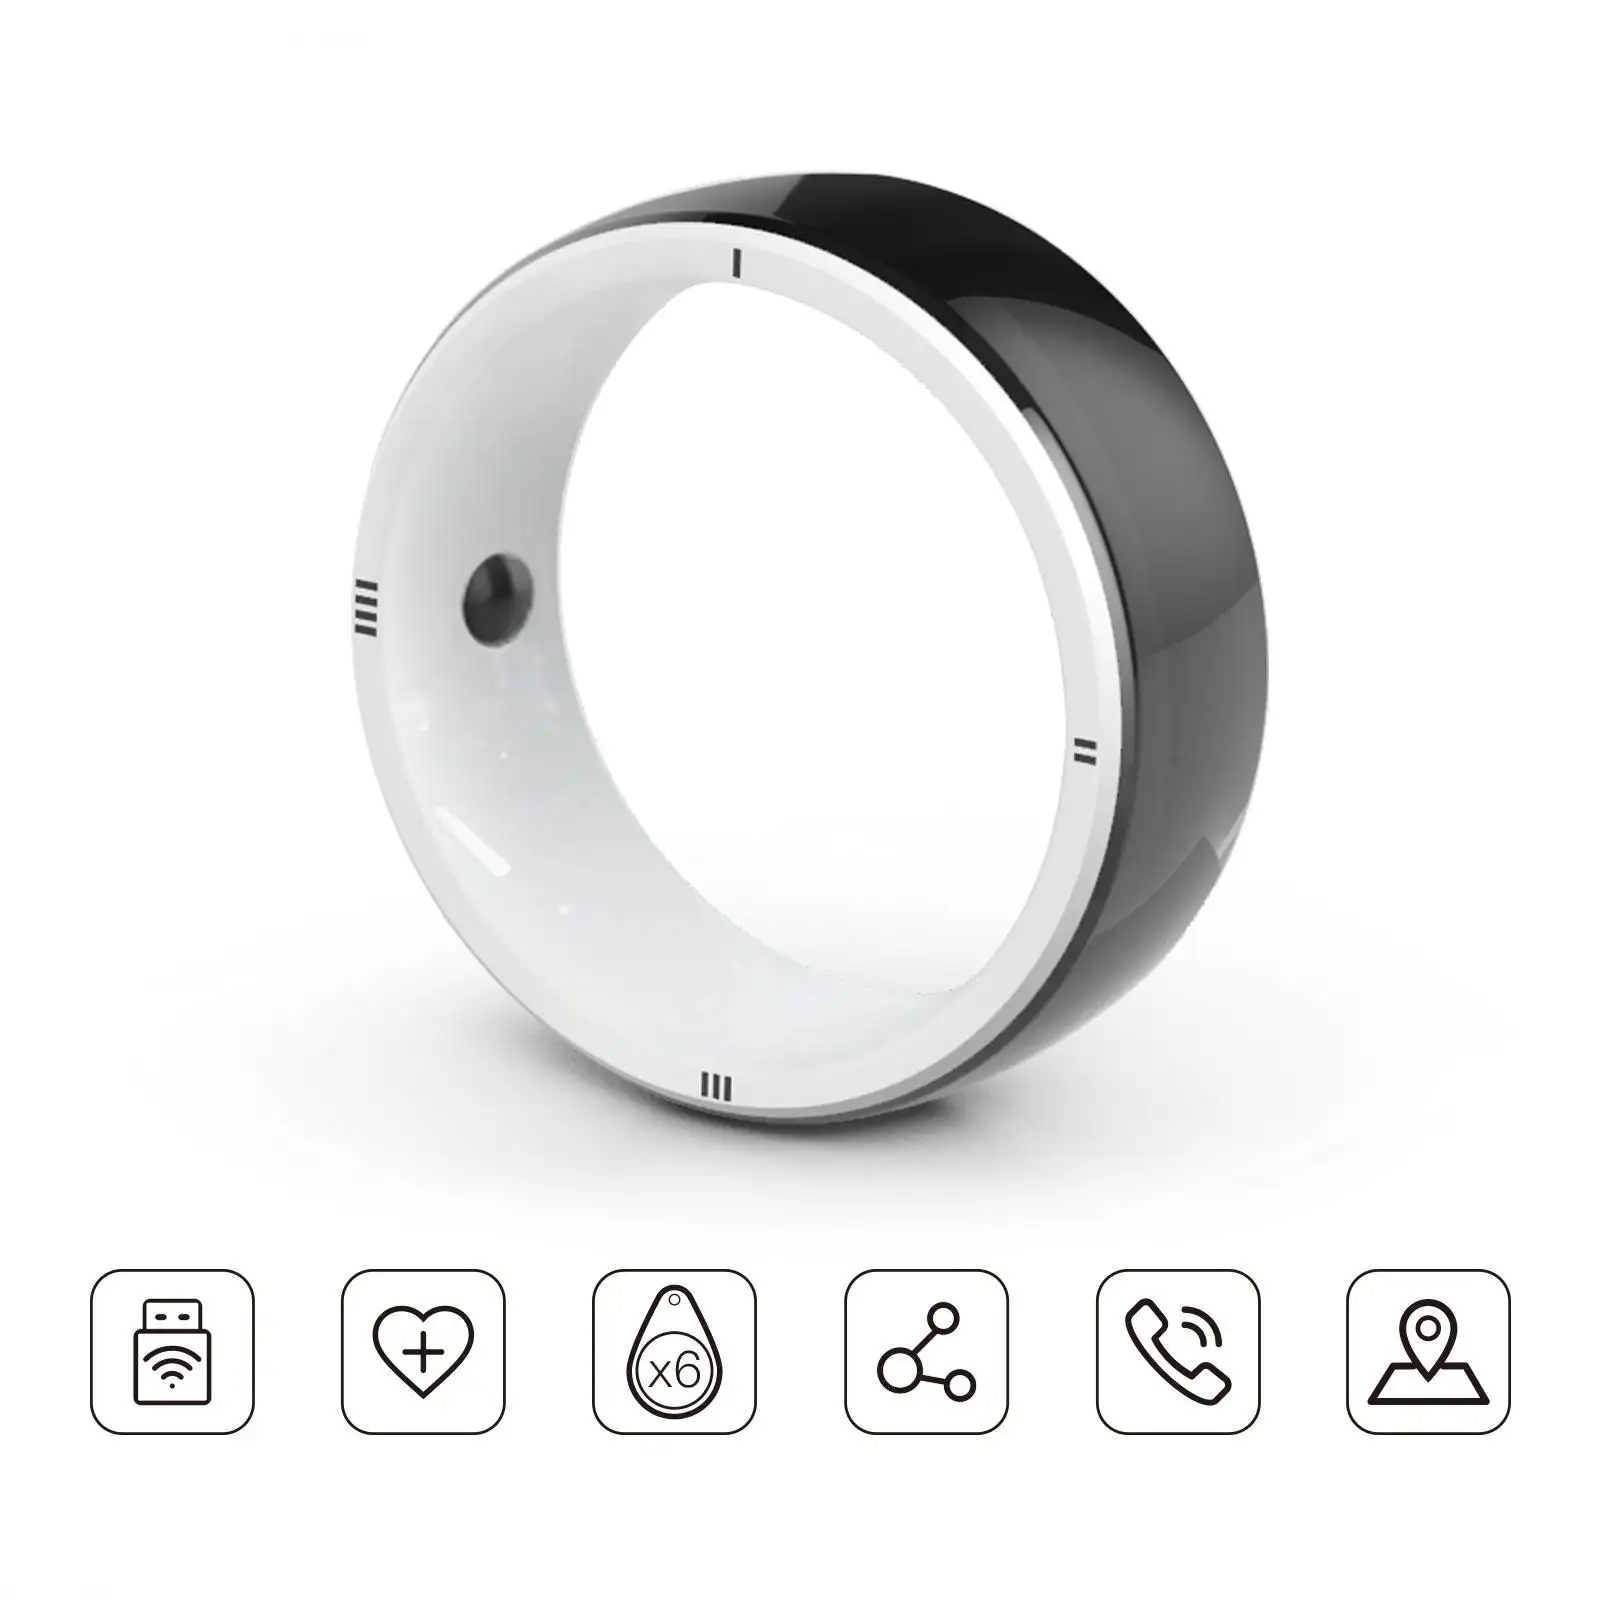 JAKCOM R5 Smart Ring New Smart Ring arrival as wedding songs 30 amp marine cord air vent car holder picture frame sizes best